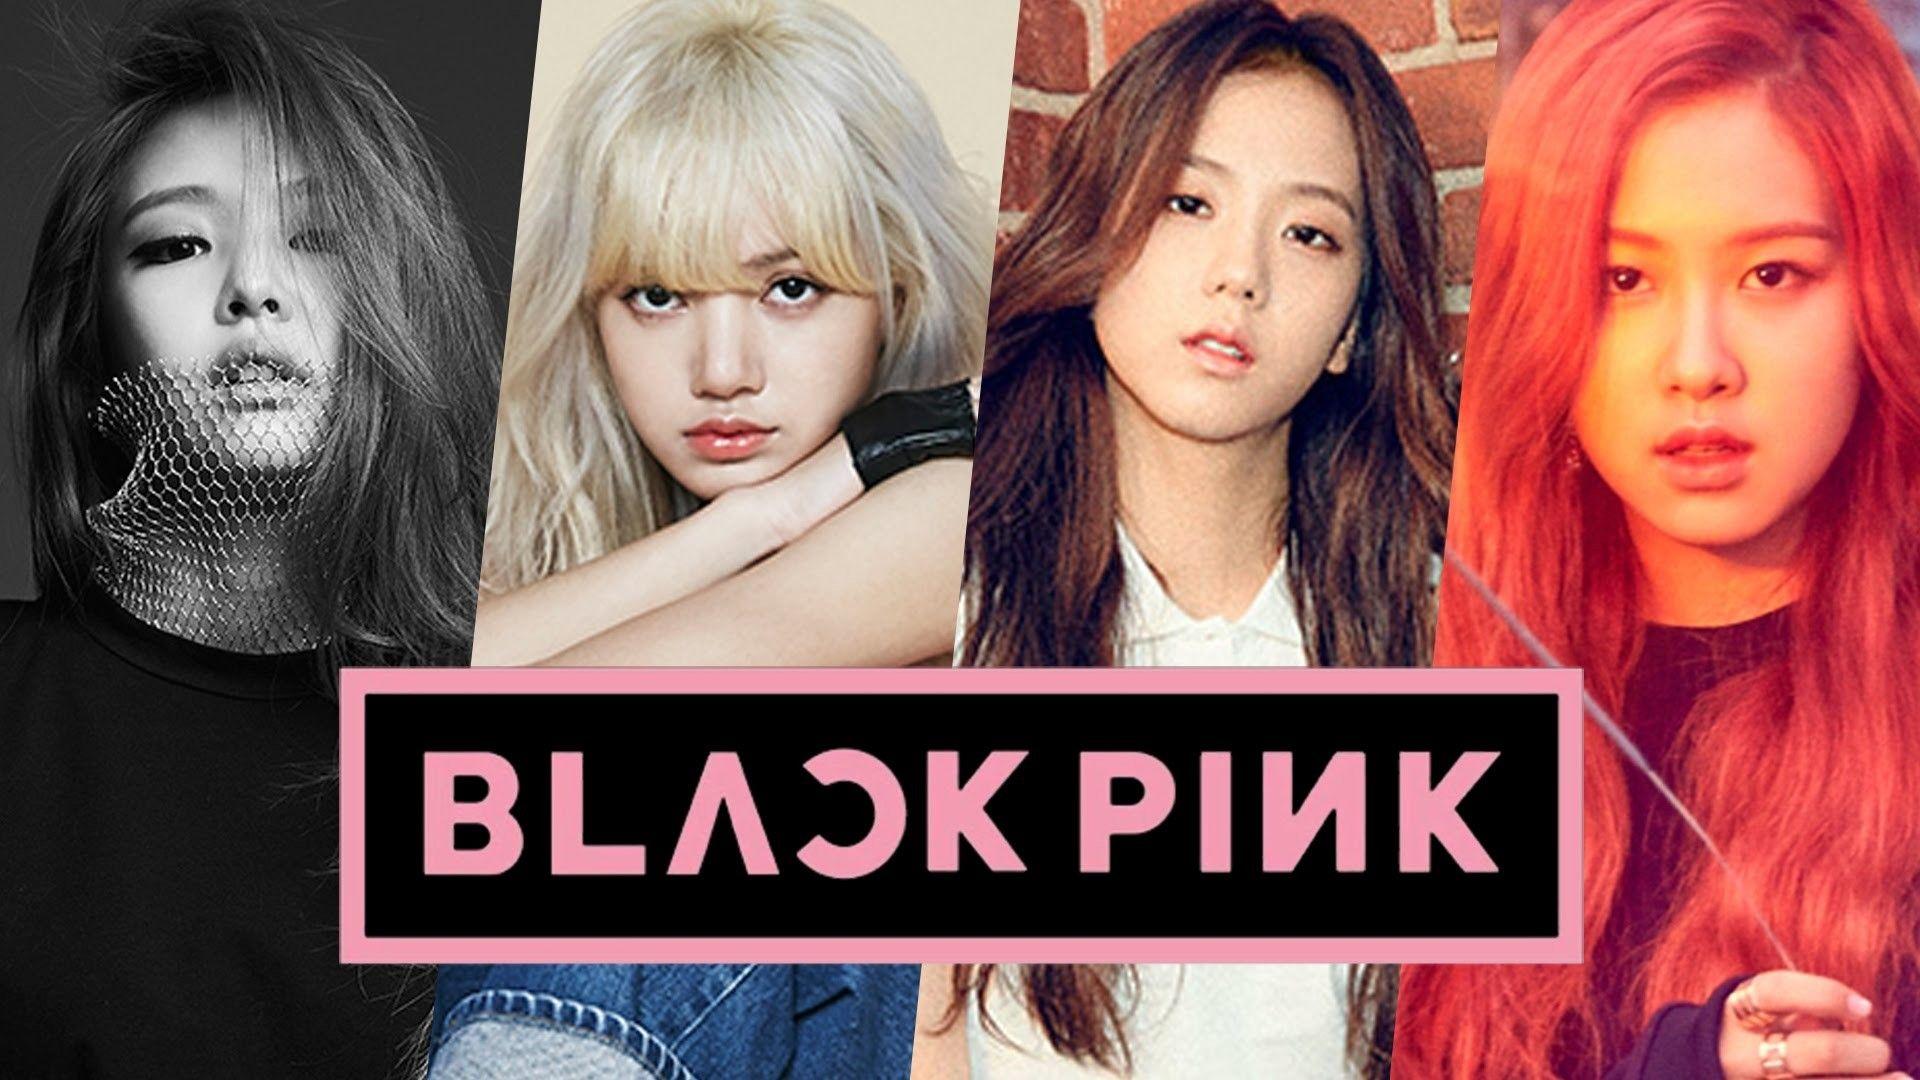 Colouring Your Phone and Desktop With Blackpink's Logo and Wallpaper